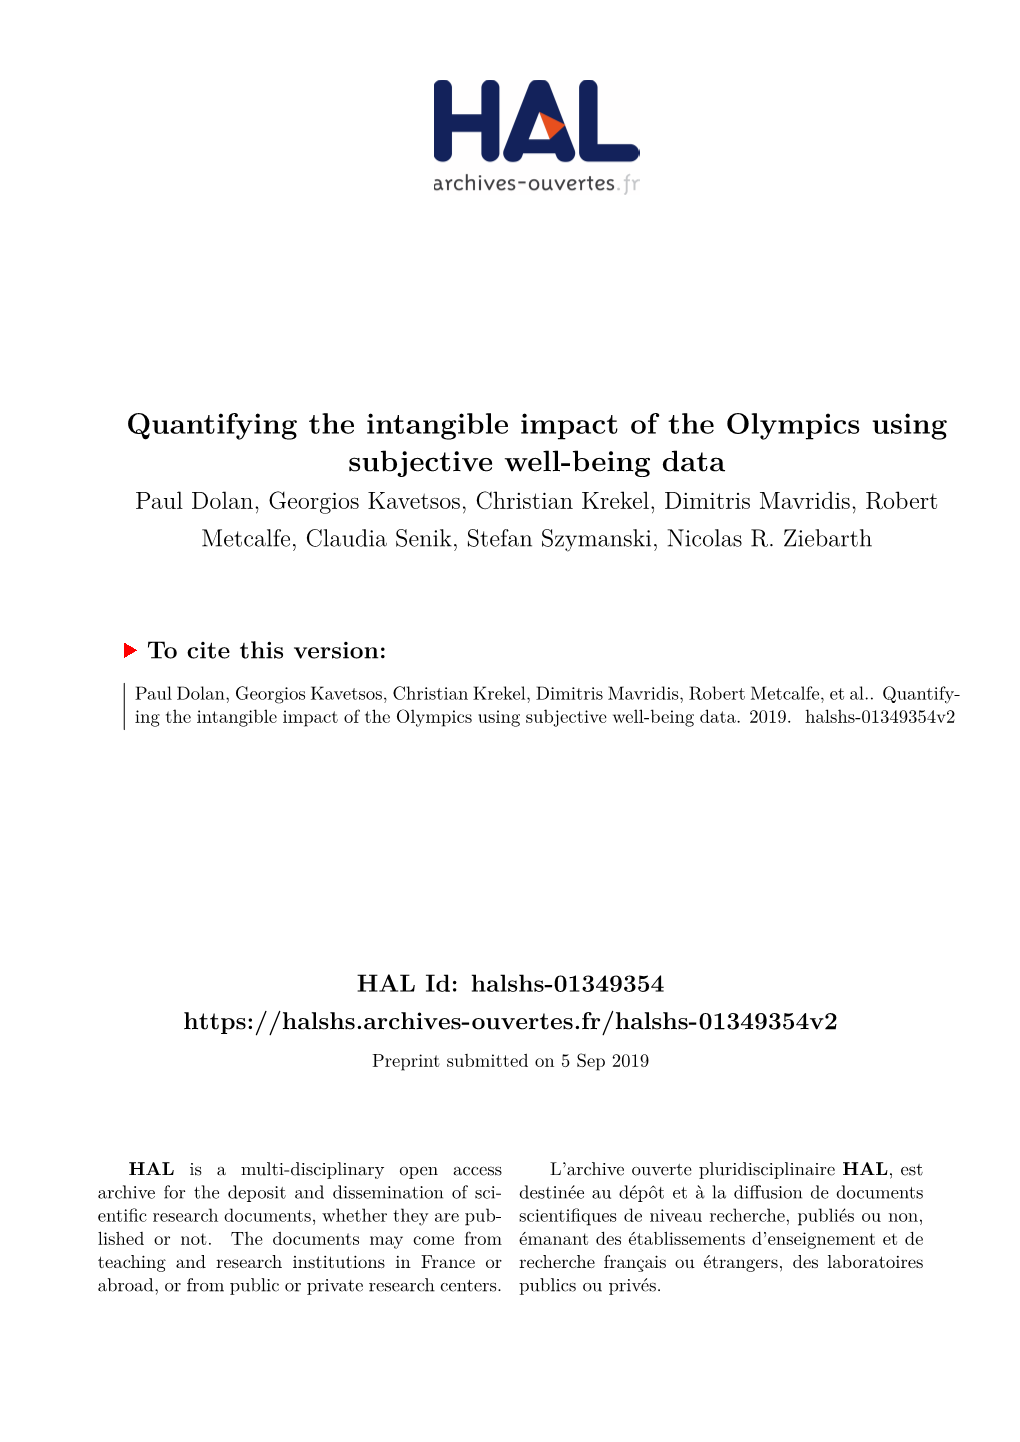 Quantifying the Intangible Impact of the Olympics Using Subjective Well